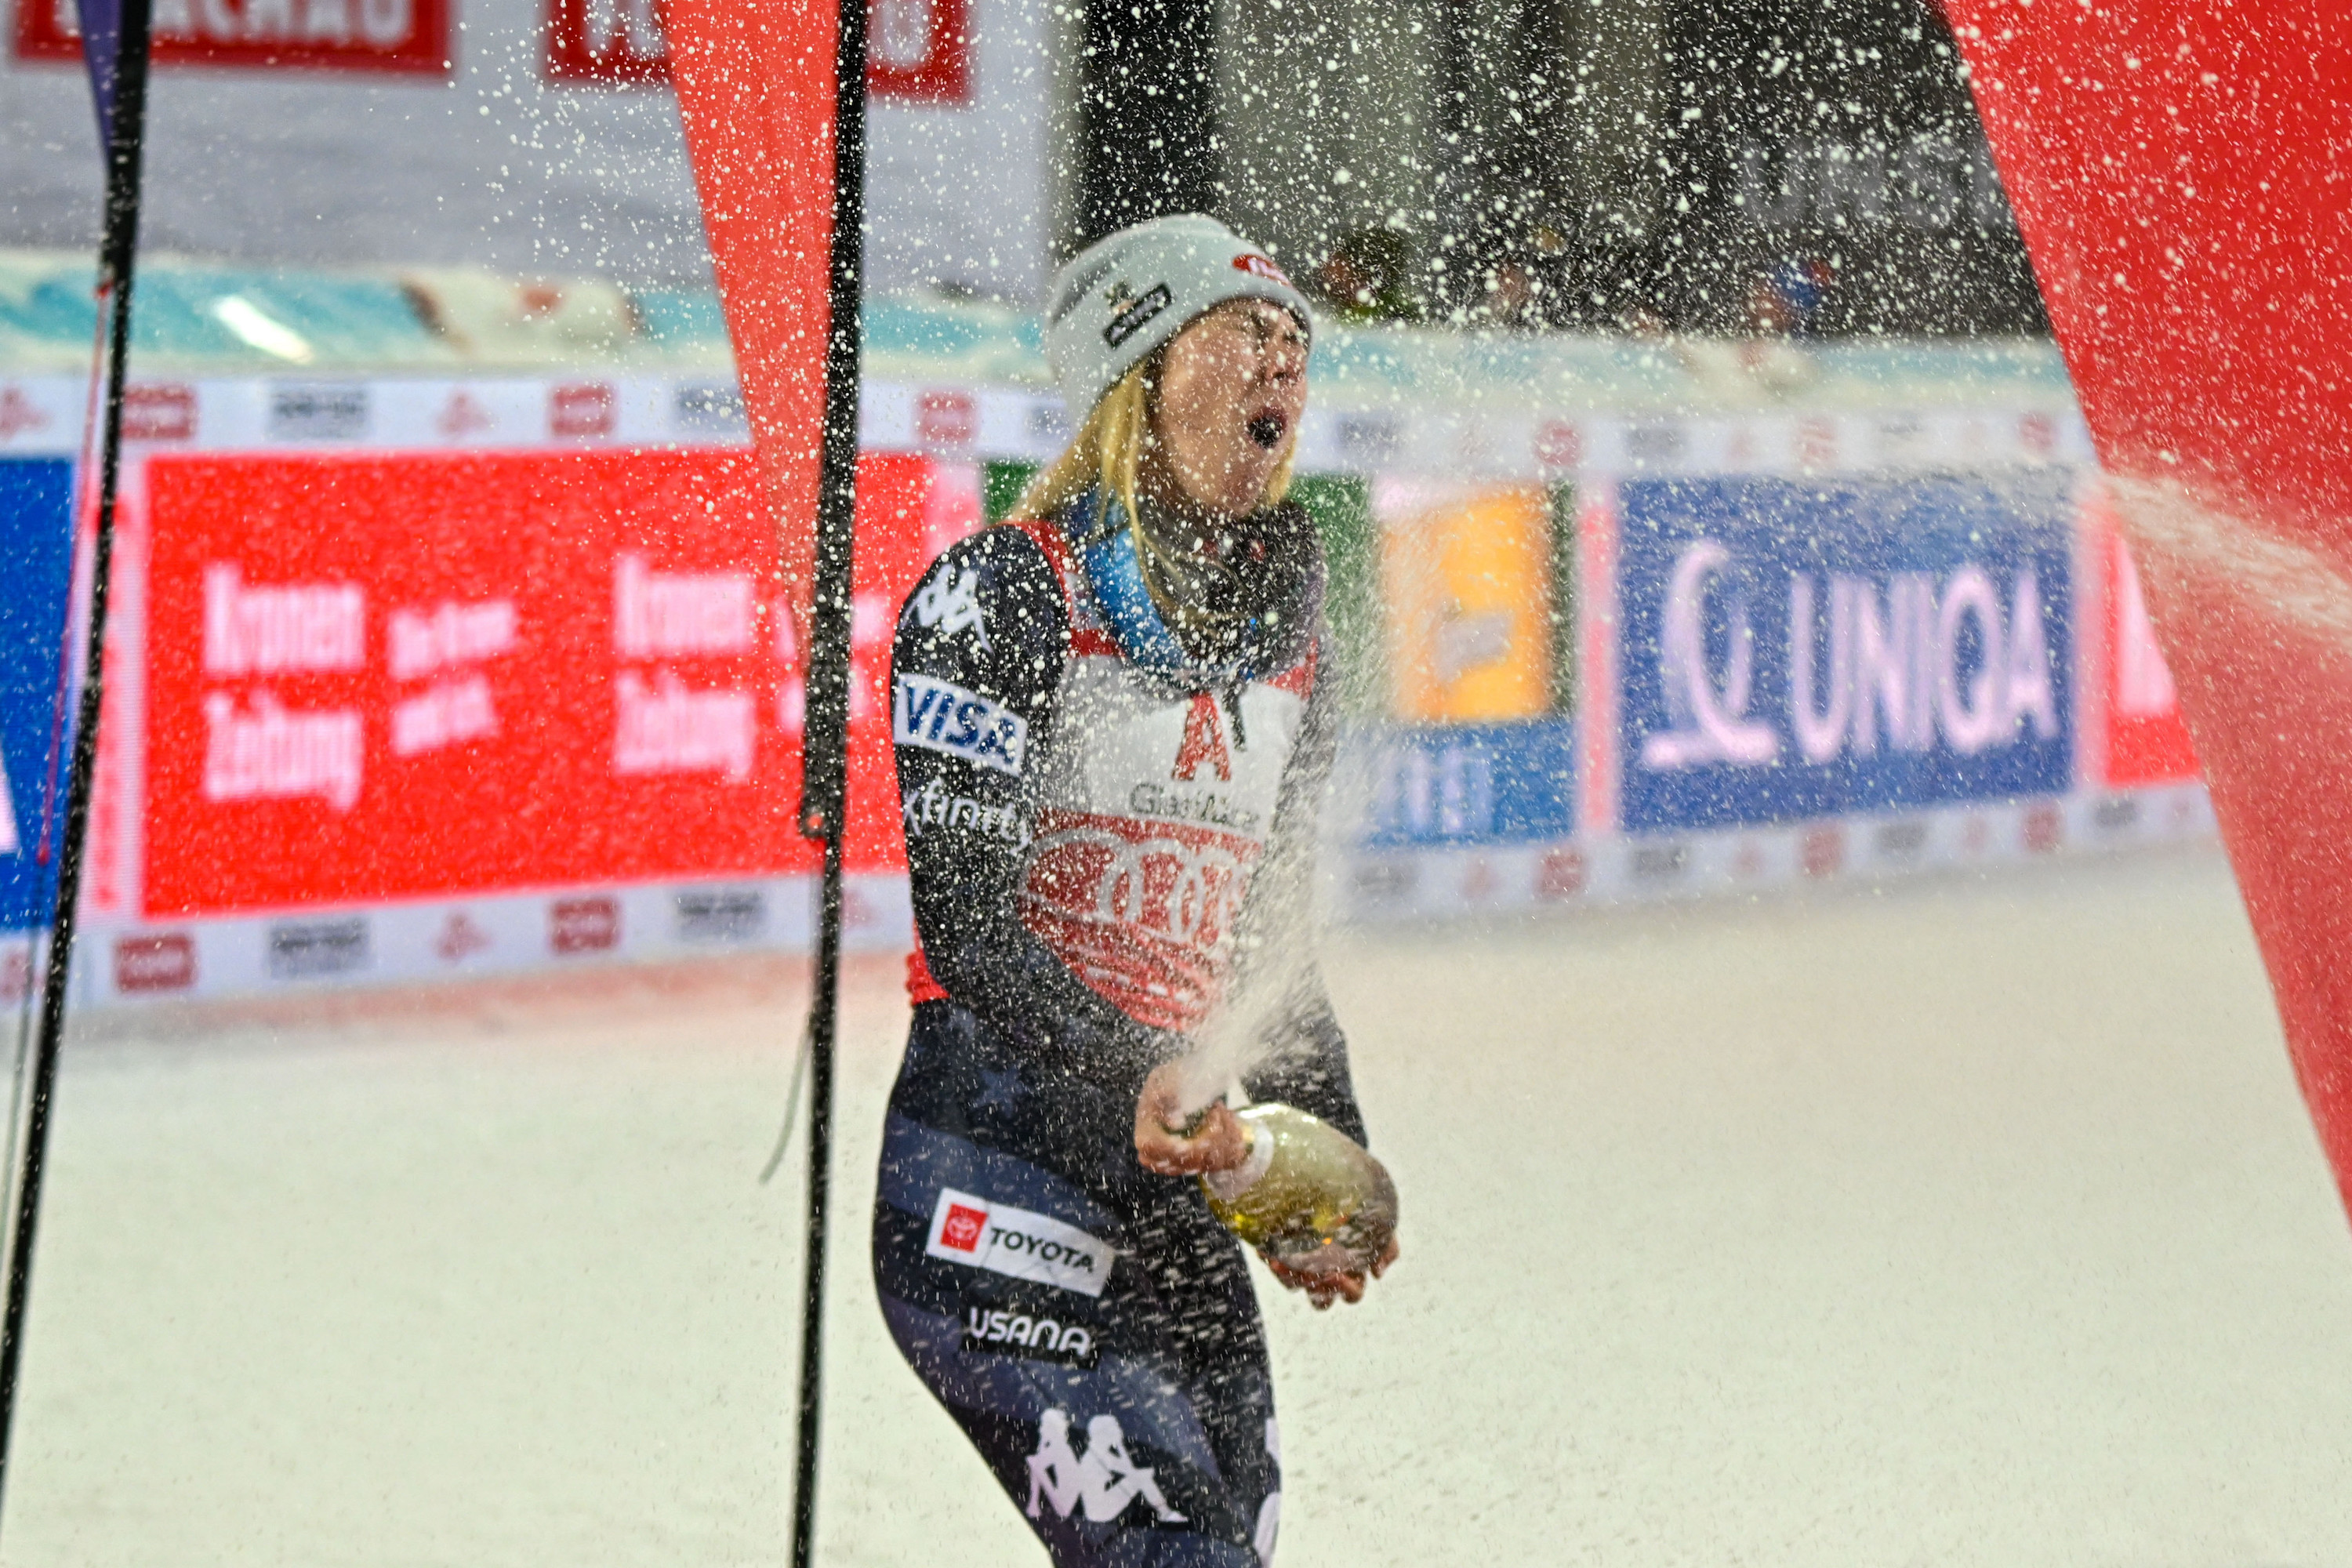 Mikaela Shiffrin of United States of America during the flower ceremony of Audi FIS Alpine Ski World Cup Womens Slalom race on January 10, 2023 in Flachau, Austria. (Photo by Hans Peter Lottermoser/SEPA.Media /Getty Images)